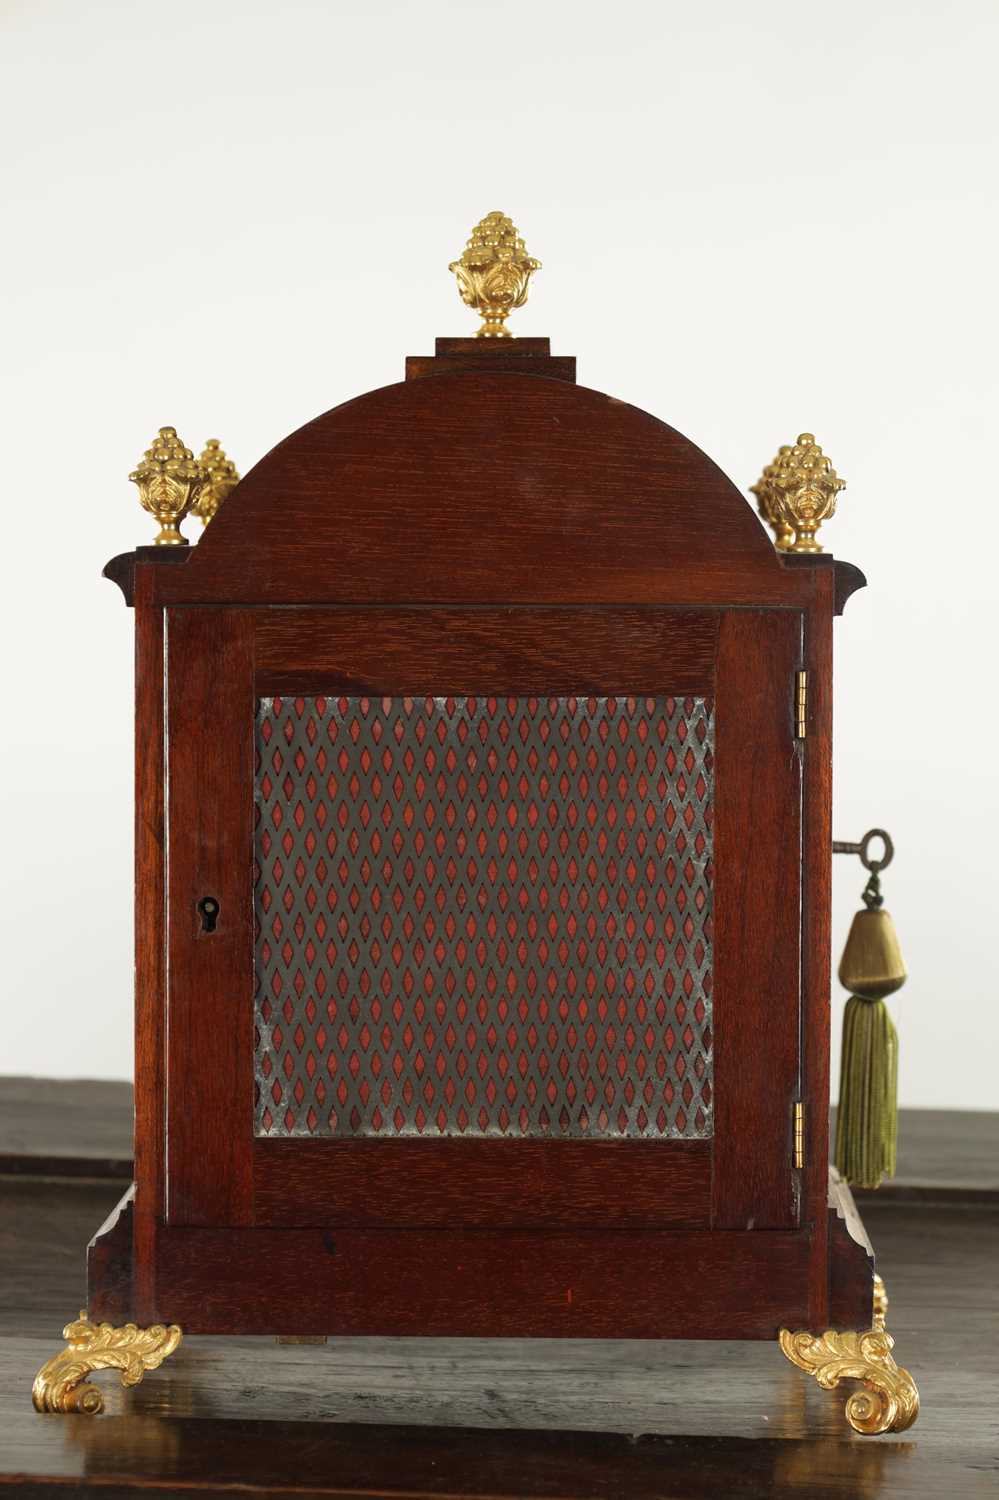 GOLDSMITHS & SILVERSMITHS CO. LONDON. A SMALL LATE 19TH CENTURY ORMOLU MOUNTED MAHOGANY DOUBLE FUSEE - Image 6 of 9